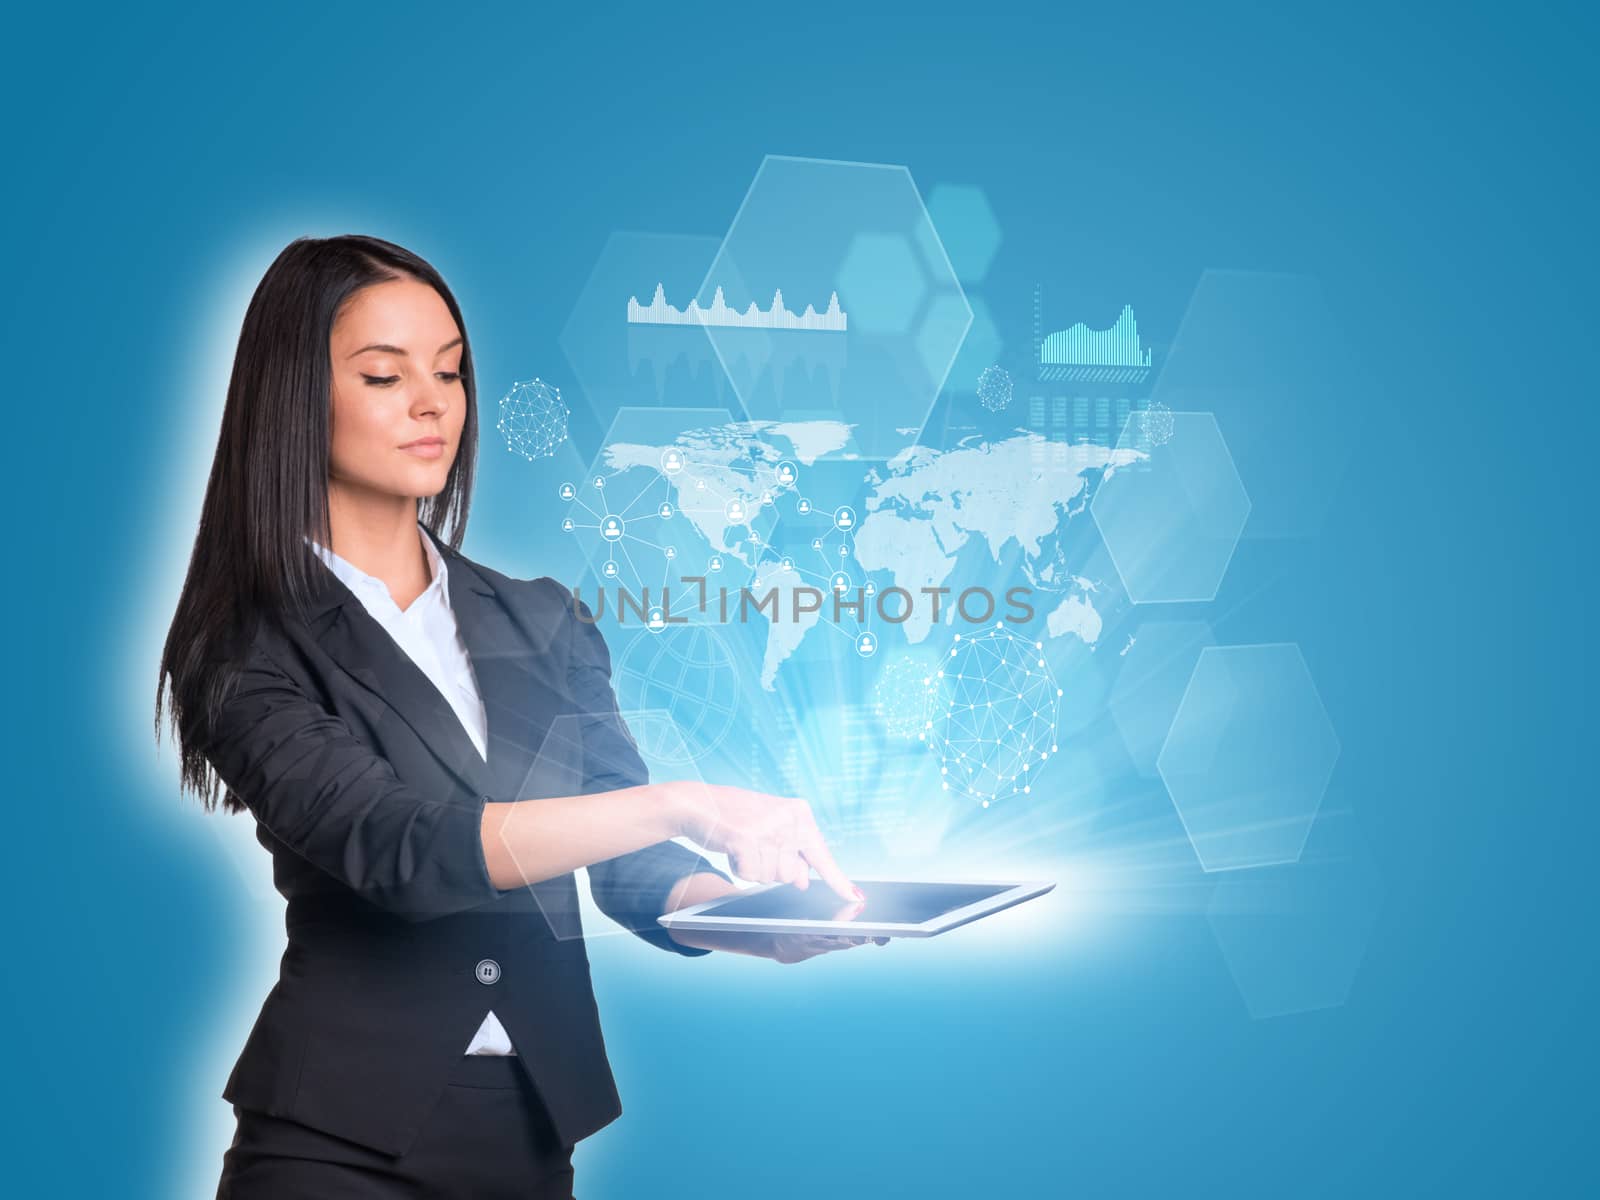 Beautiful businesswomen in suit using digital tablet. World map, transparent hexagons, graphs and network